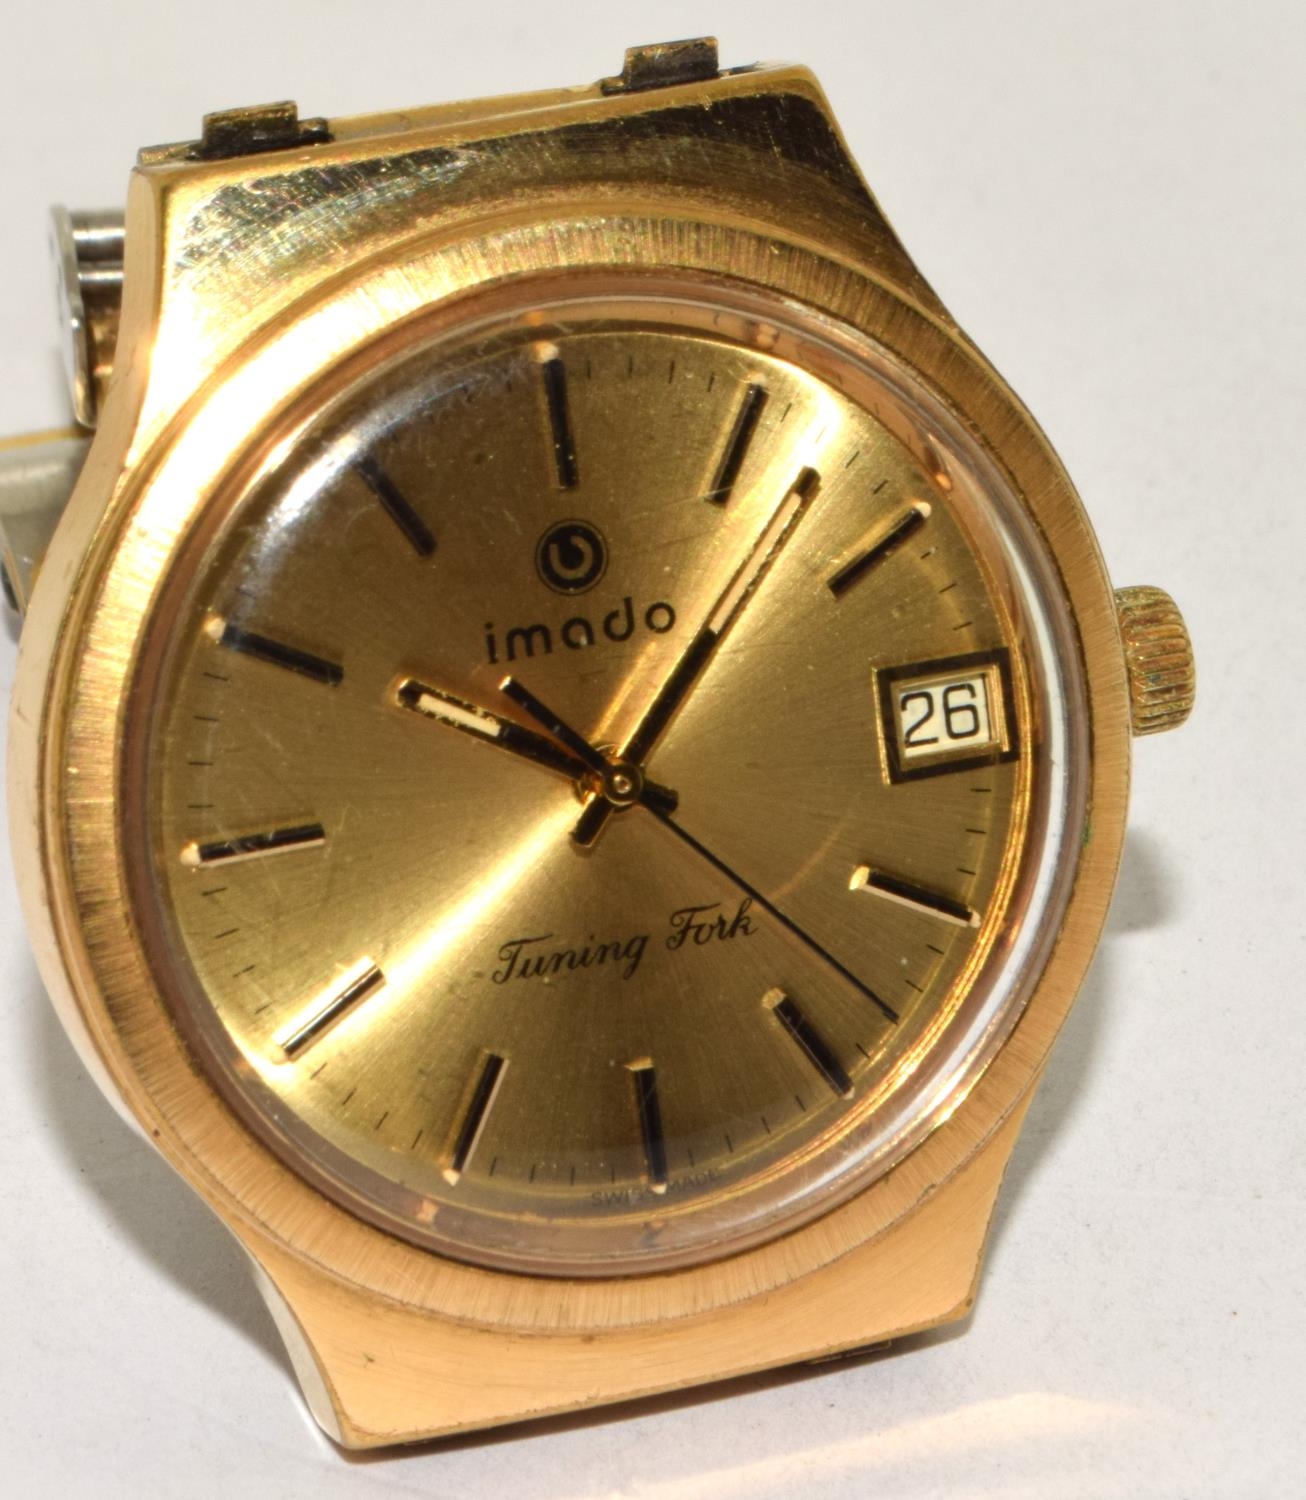 Vintage Imado Tuning Fork gents gp quartz watch. Fitted with quality Bulova movement. Requires new - Image 6 of 6